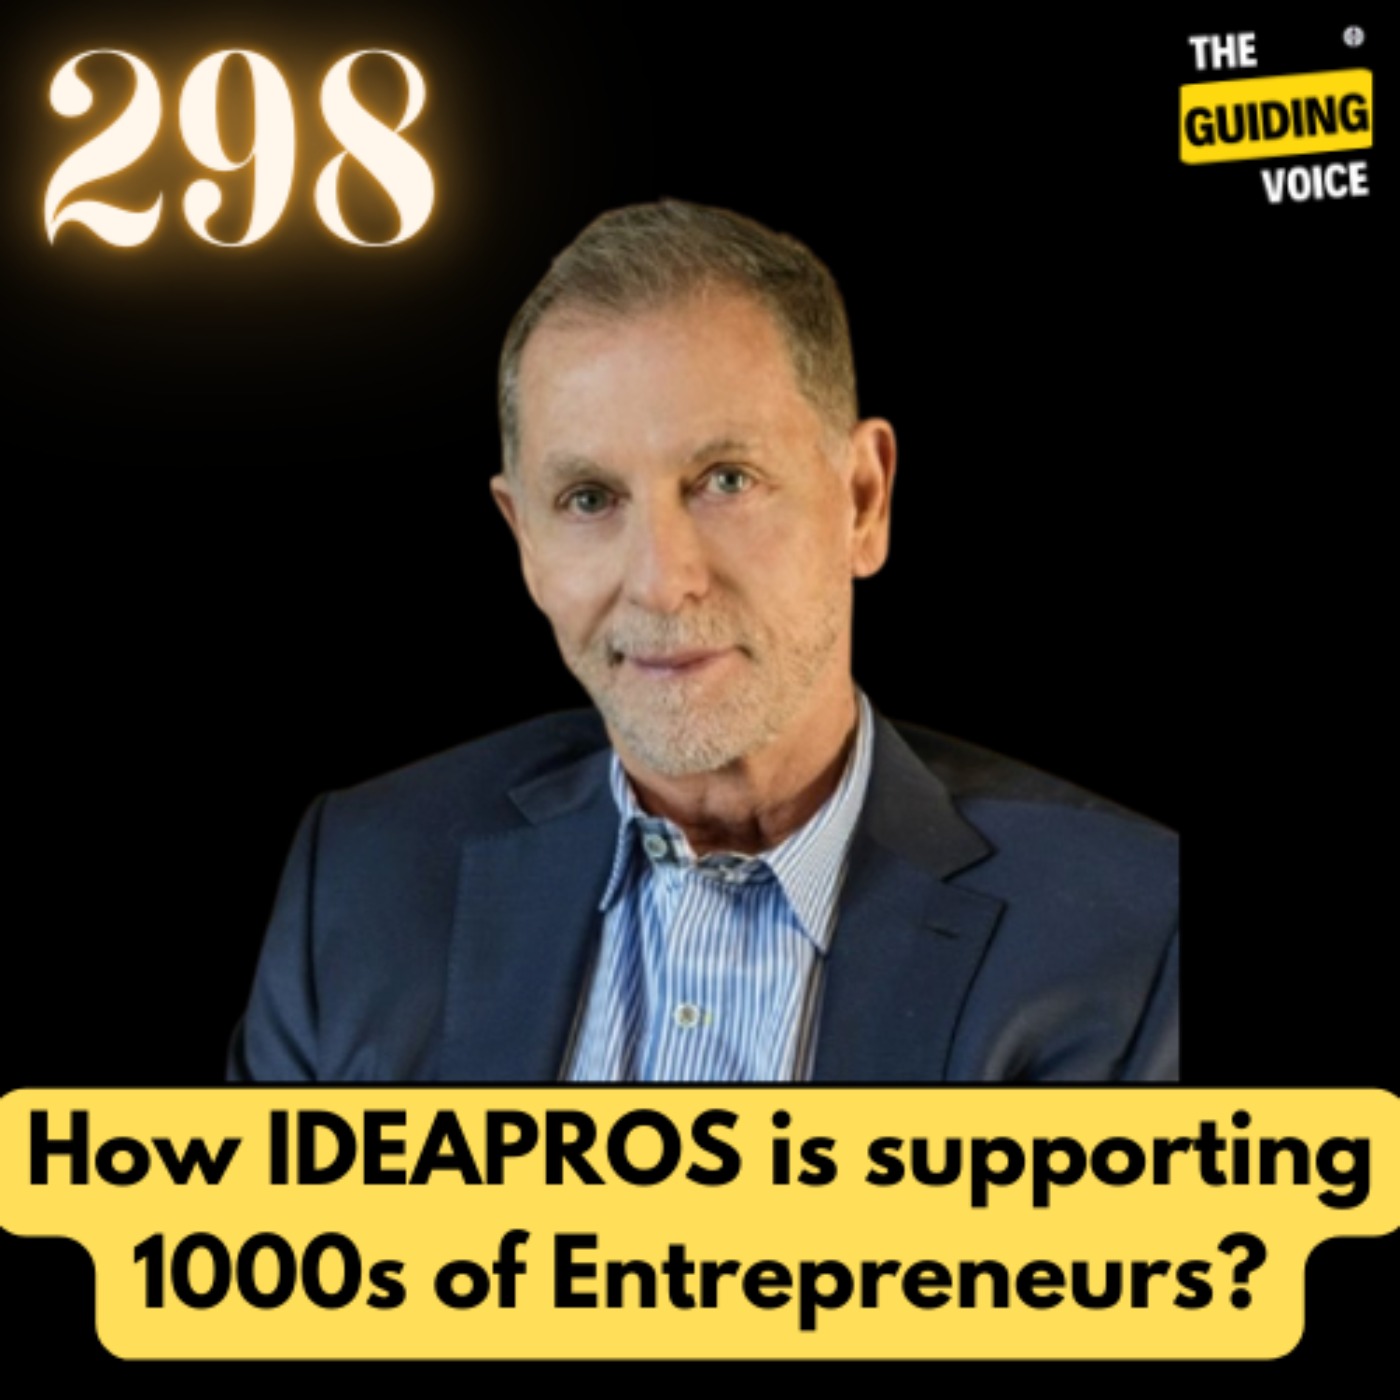 Supporting 1000s of entrepreneurs through IdeaPros |  Fred Cary | #TGV298